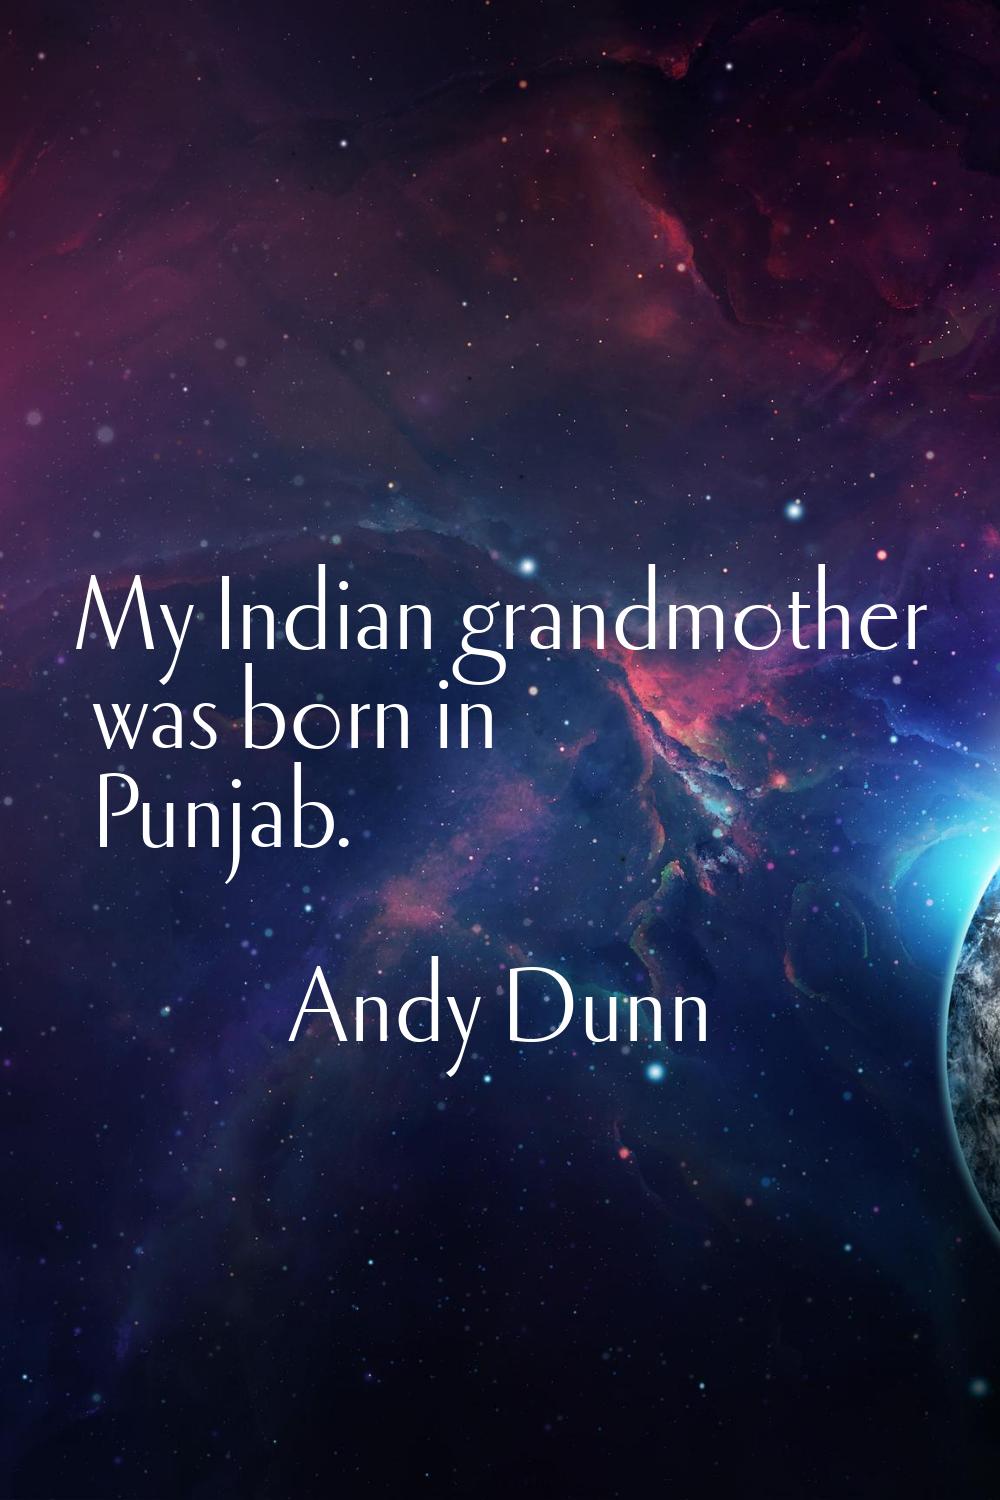 My Indian grandmother was born in Punjab.